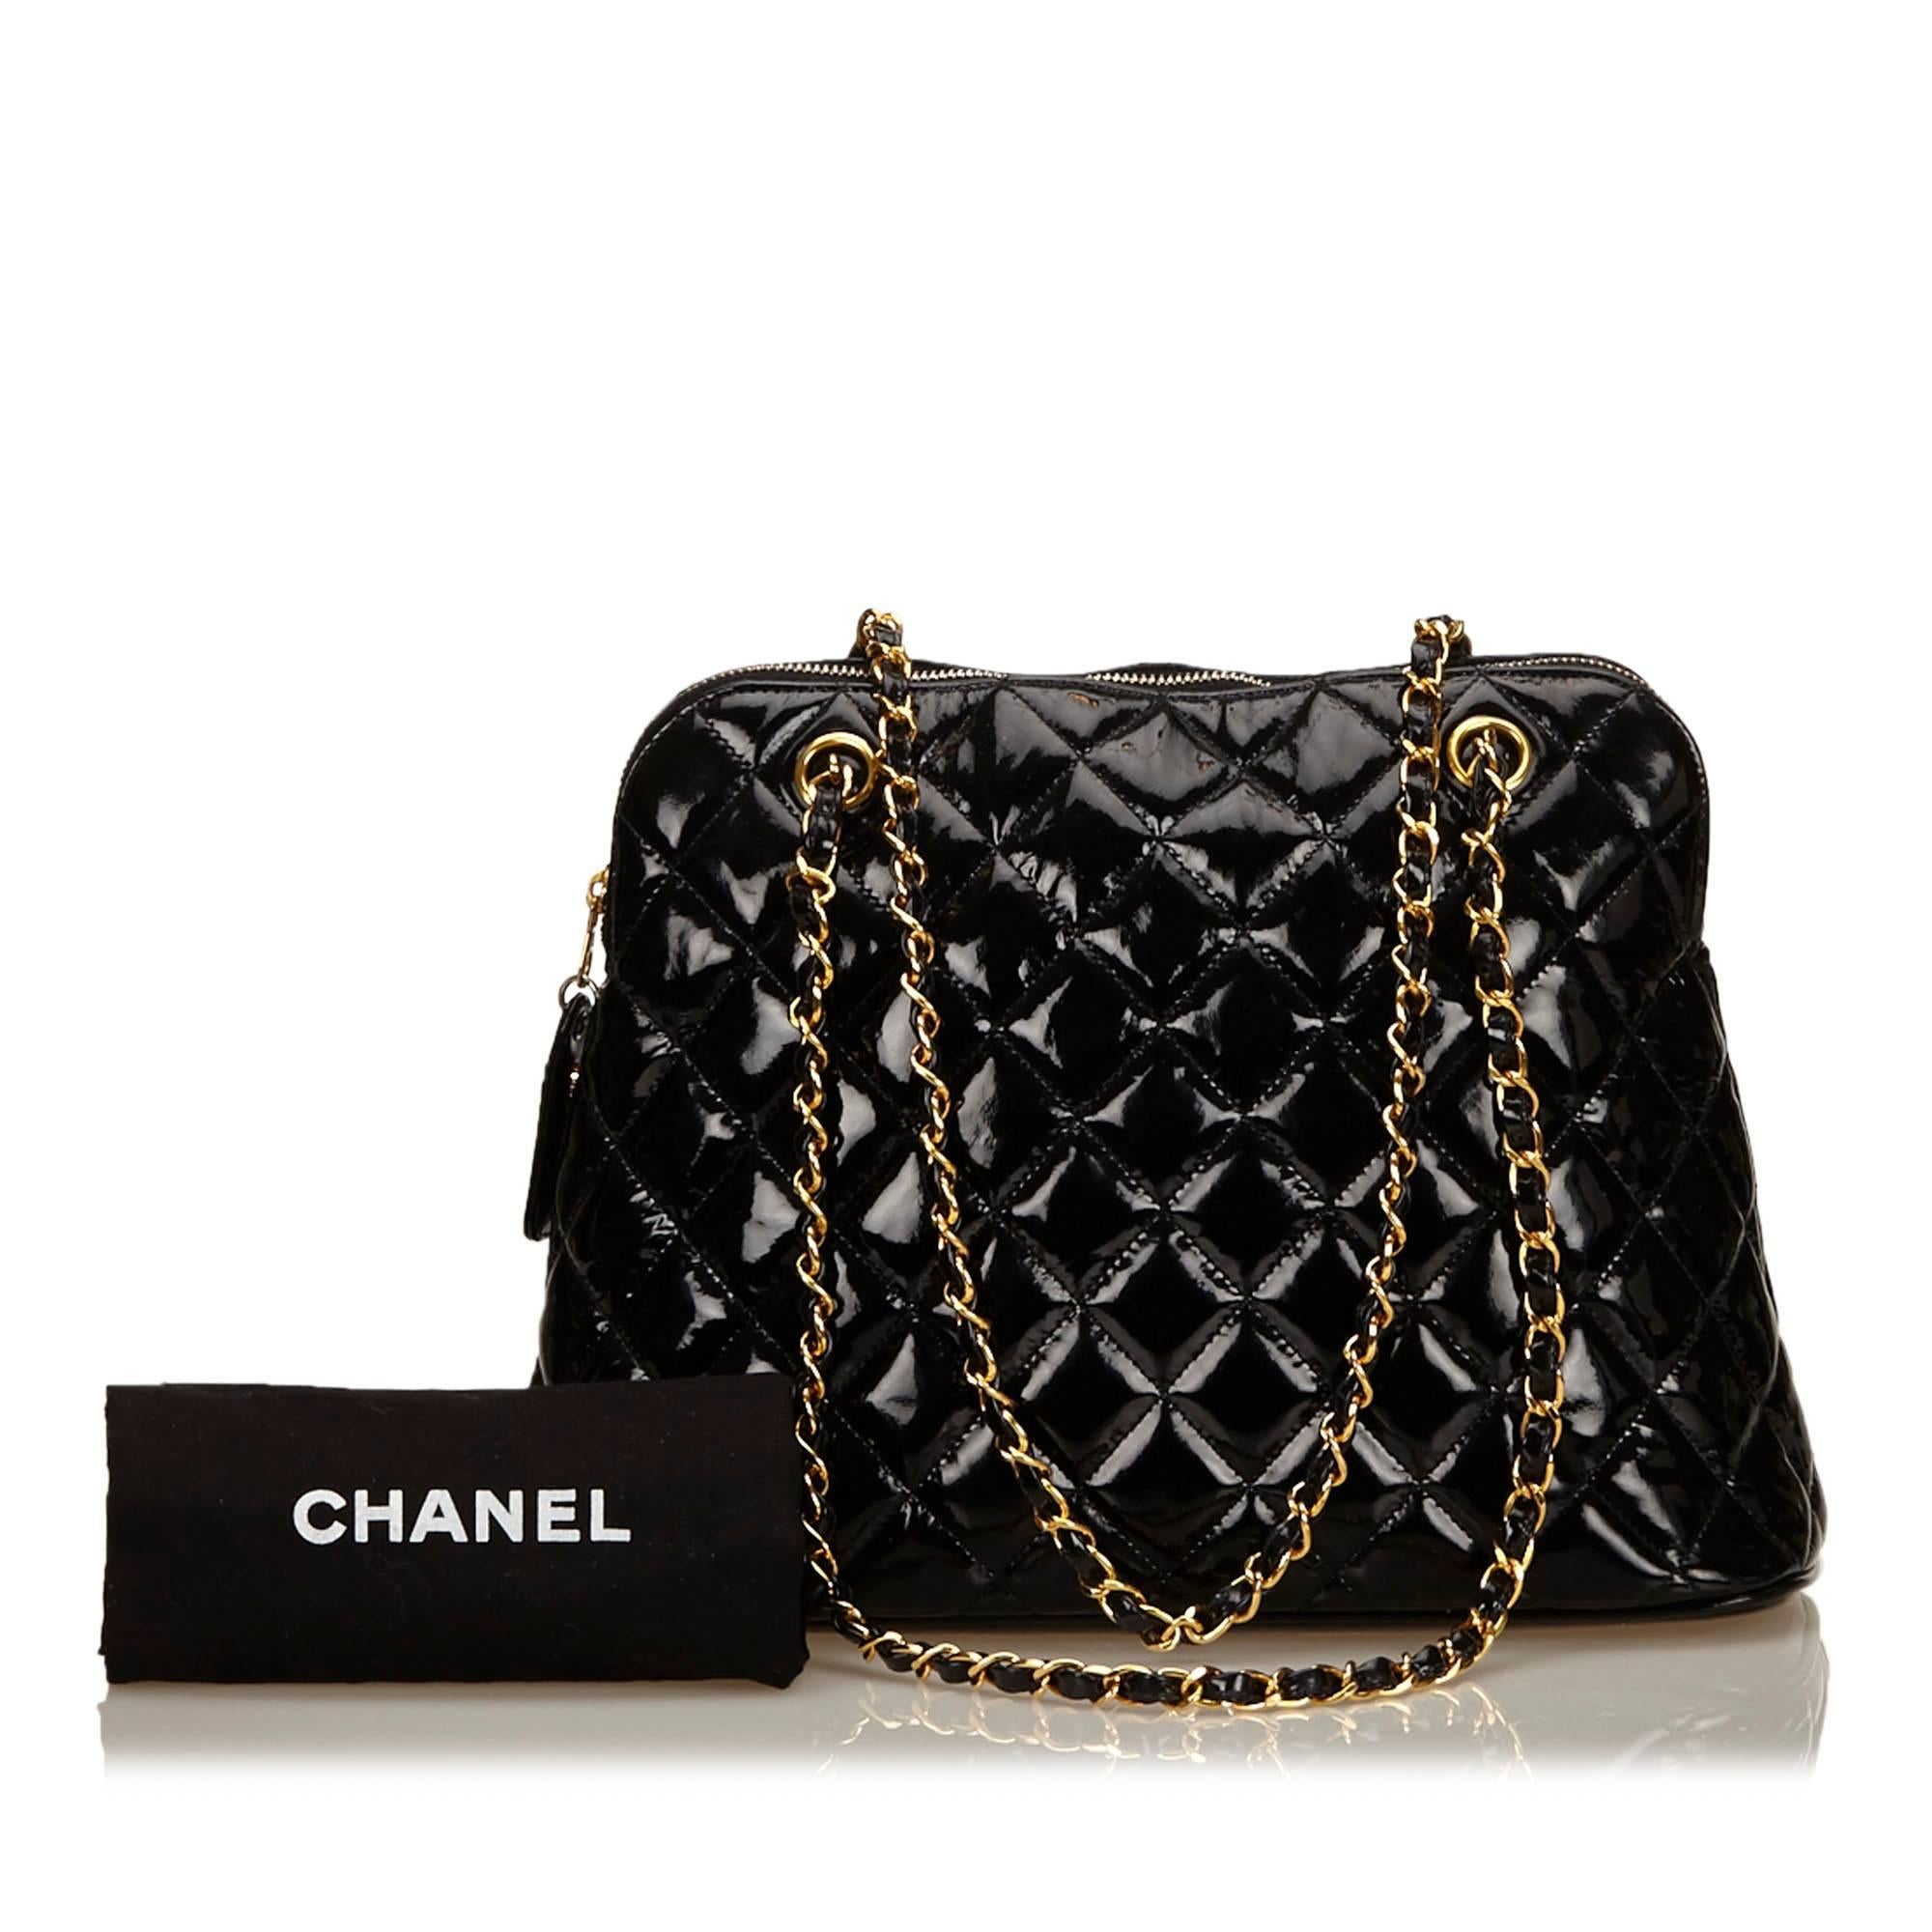 Black Chanel Quilted Patent Leather Bag 3